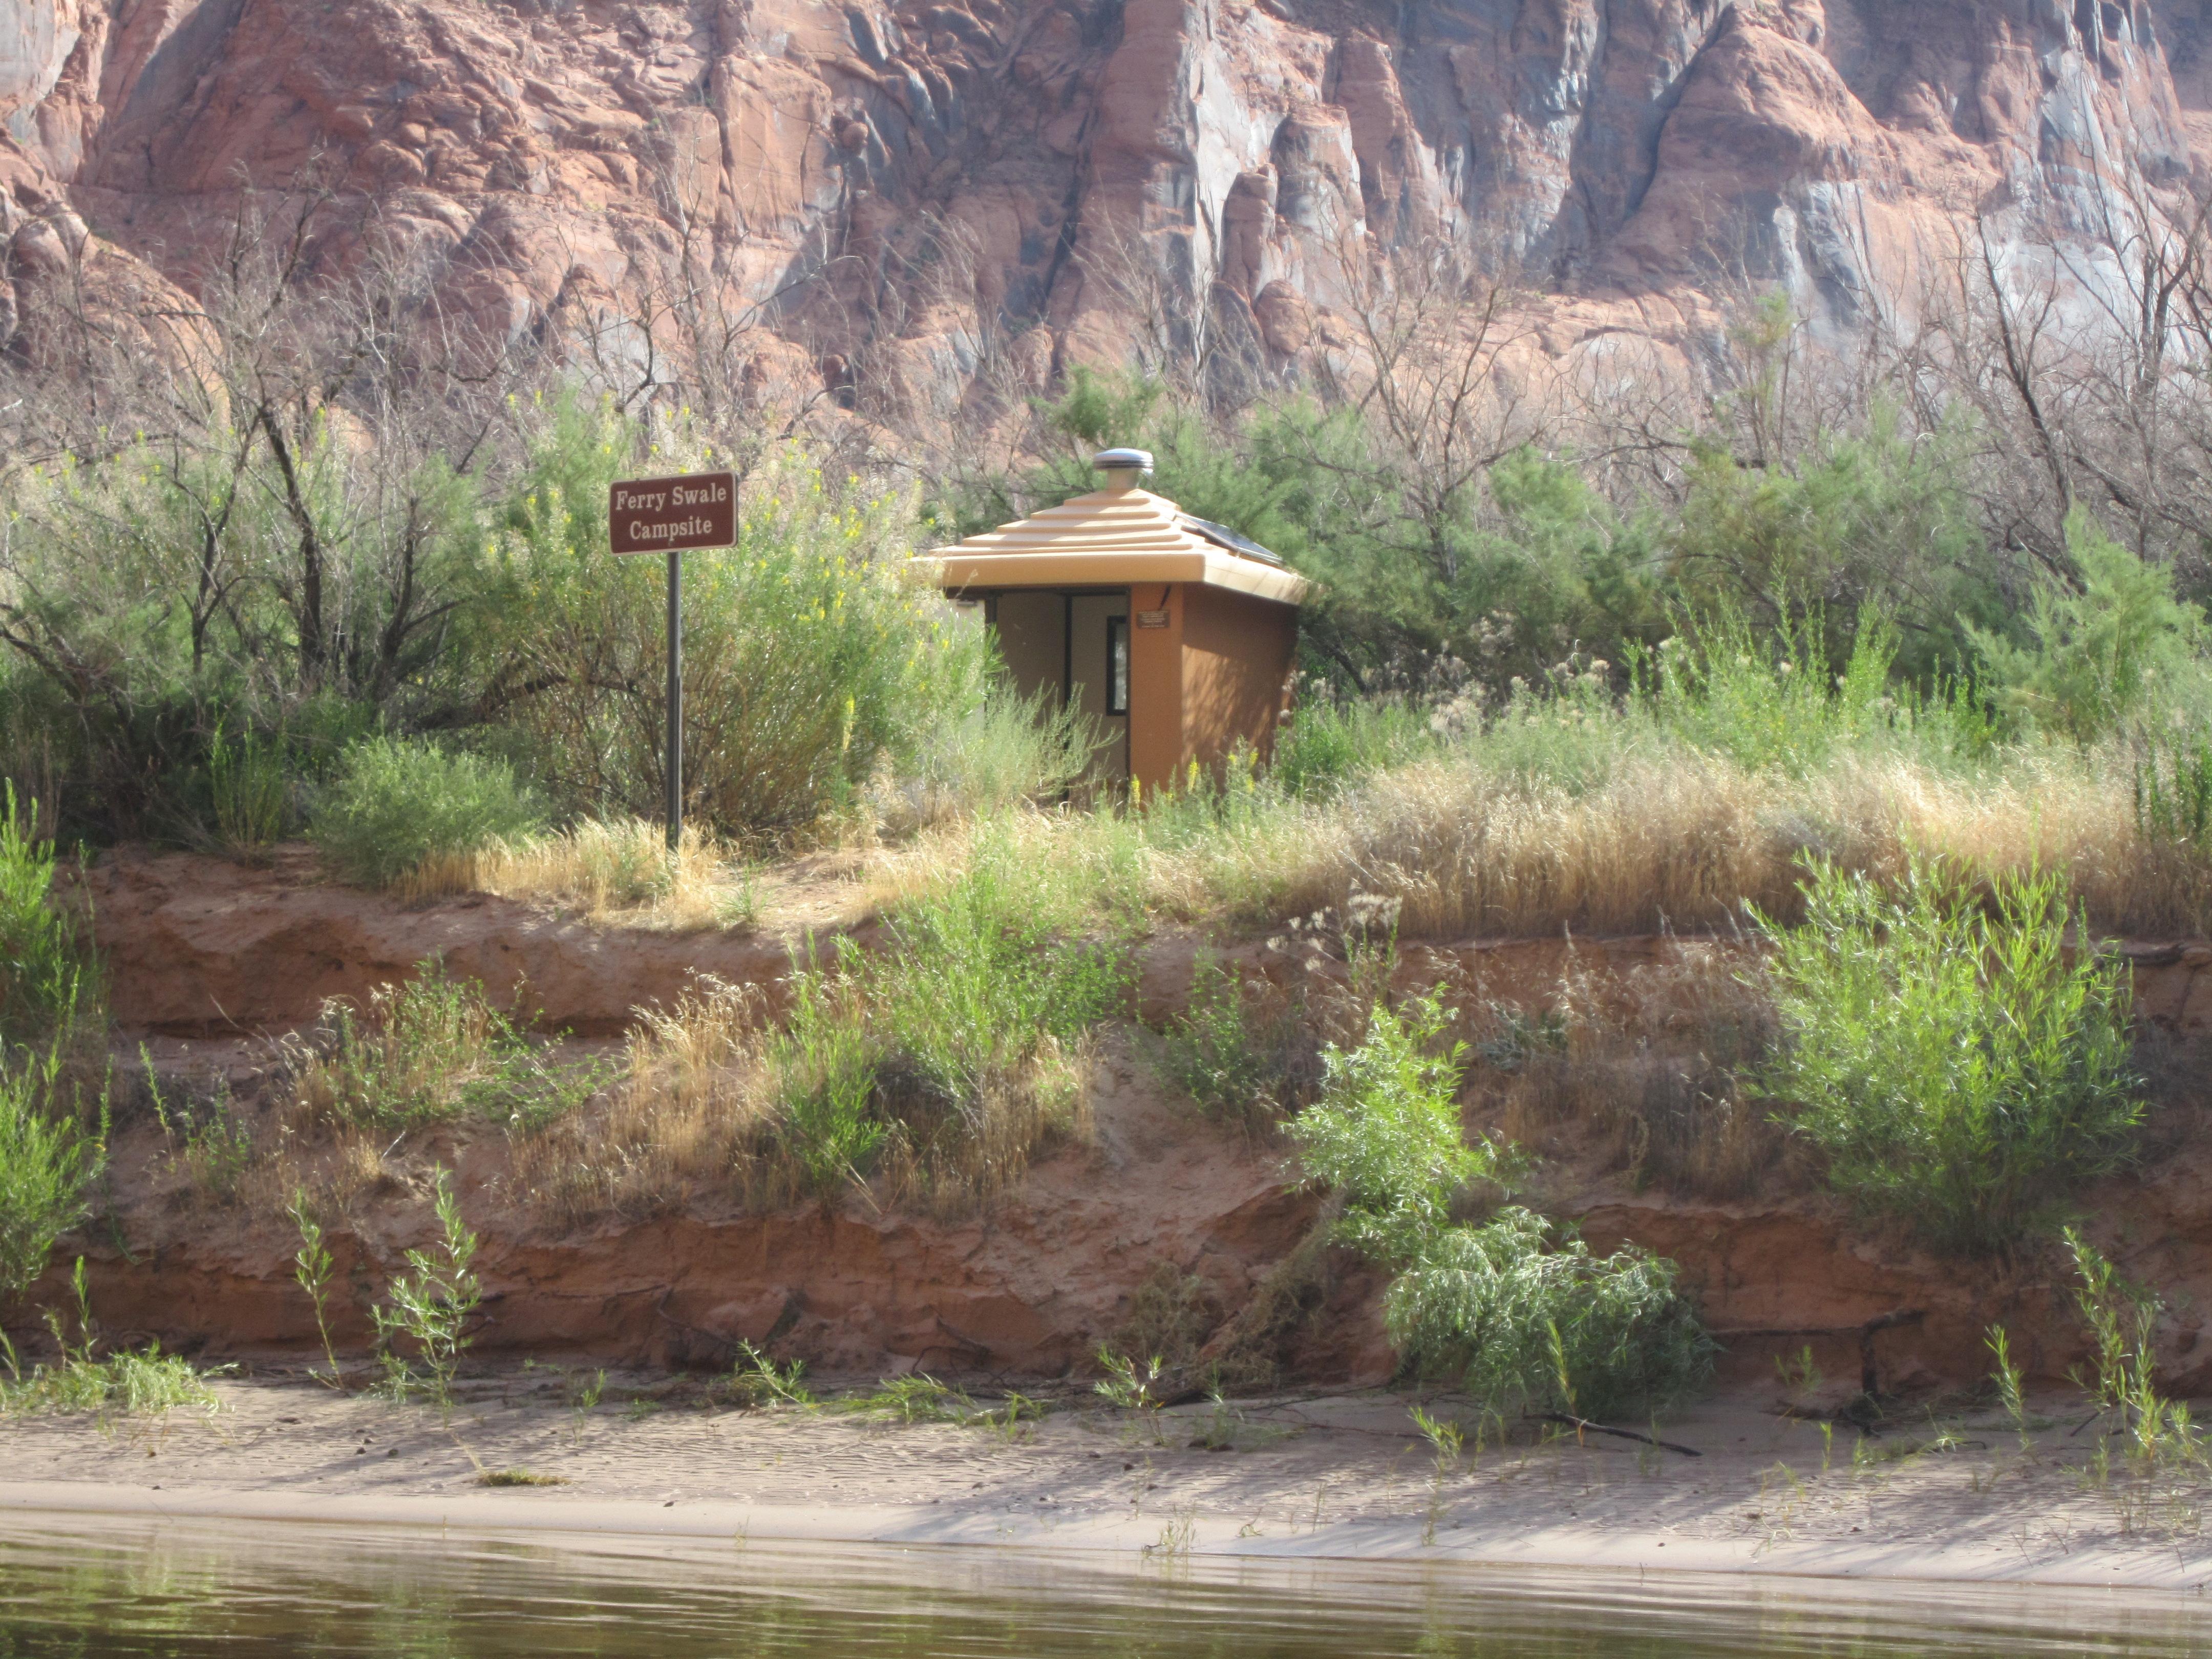 River beach with shrubs and vault toilet